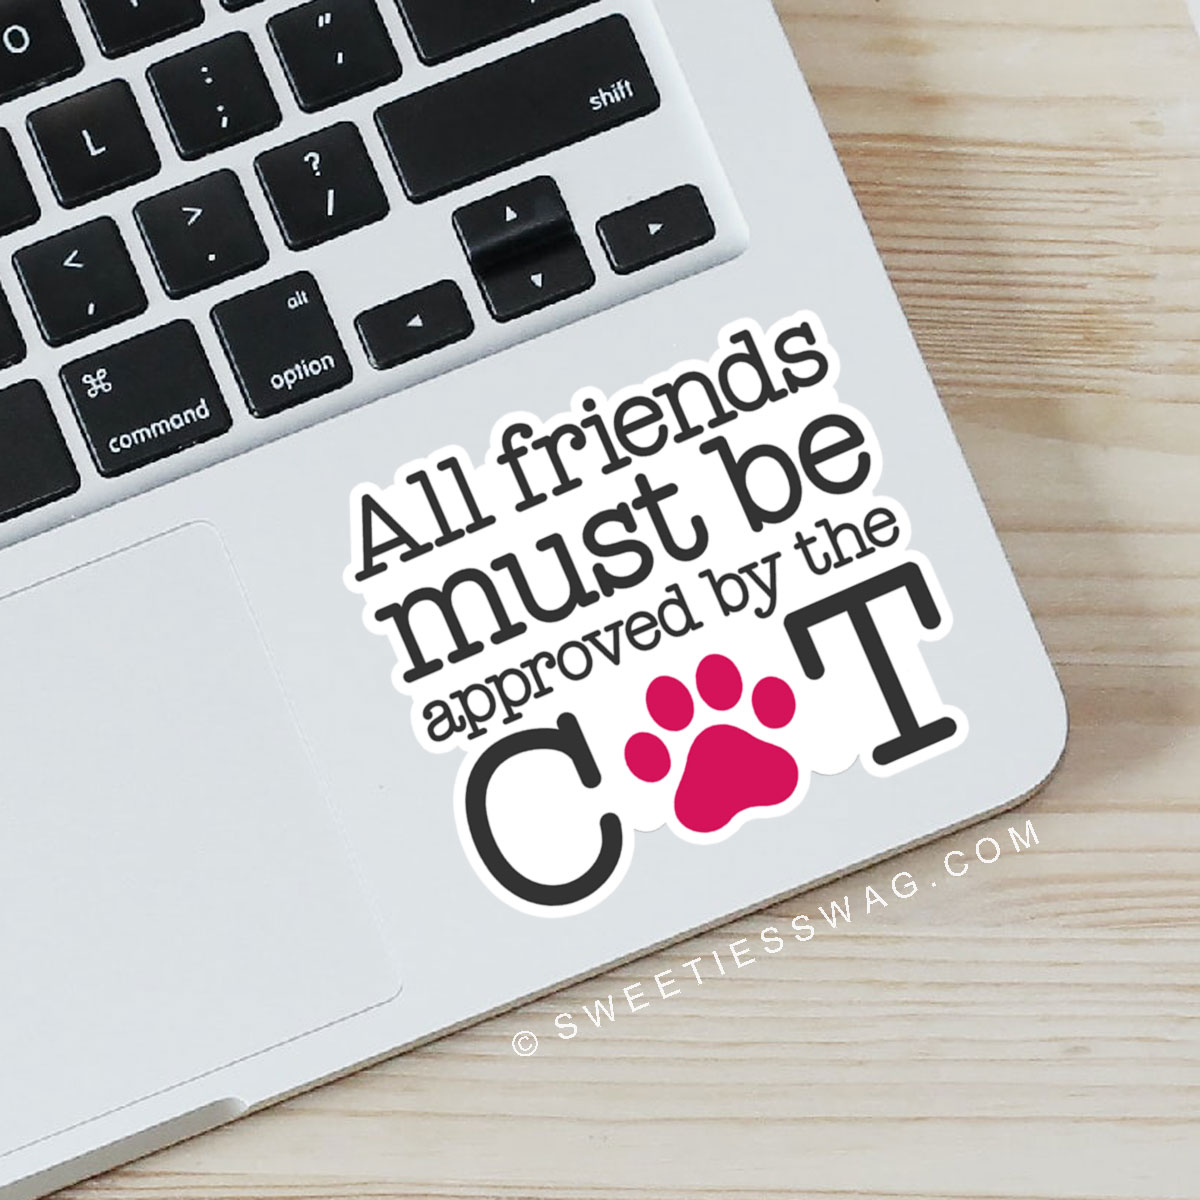 All Friends Must be Approved by the Cat Laptop Water Bottle Sticker